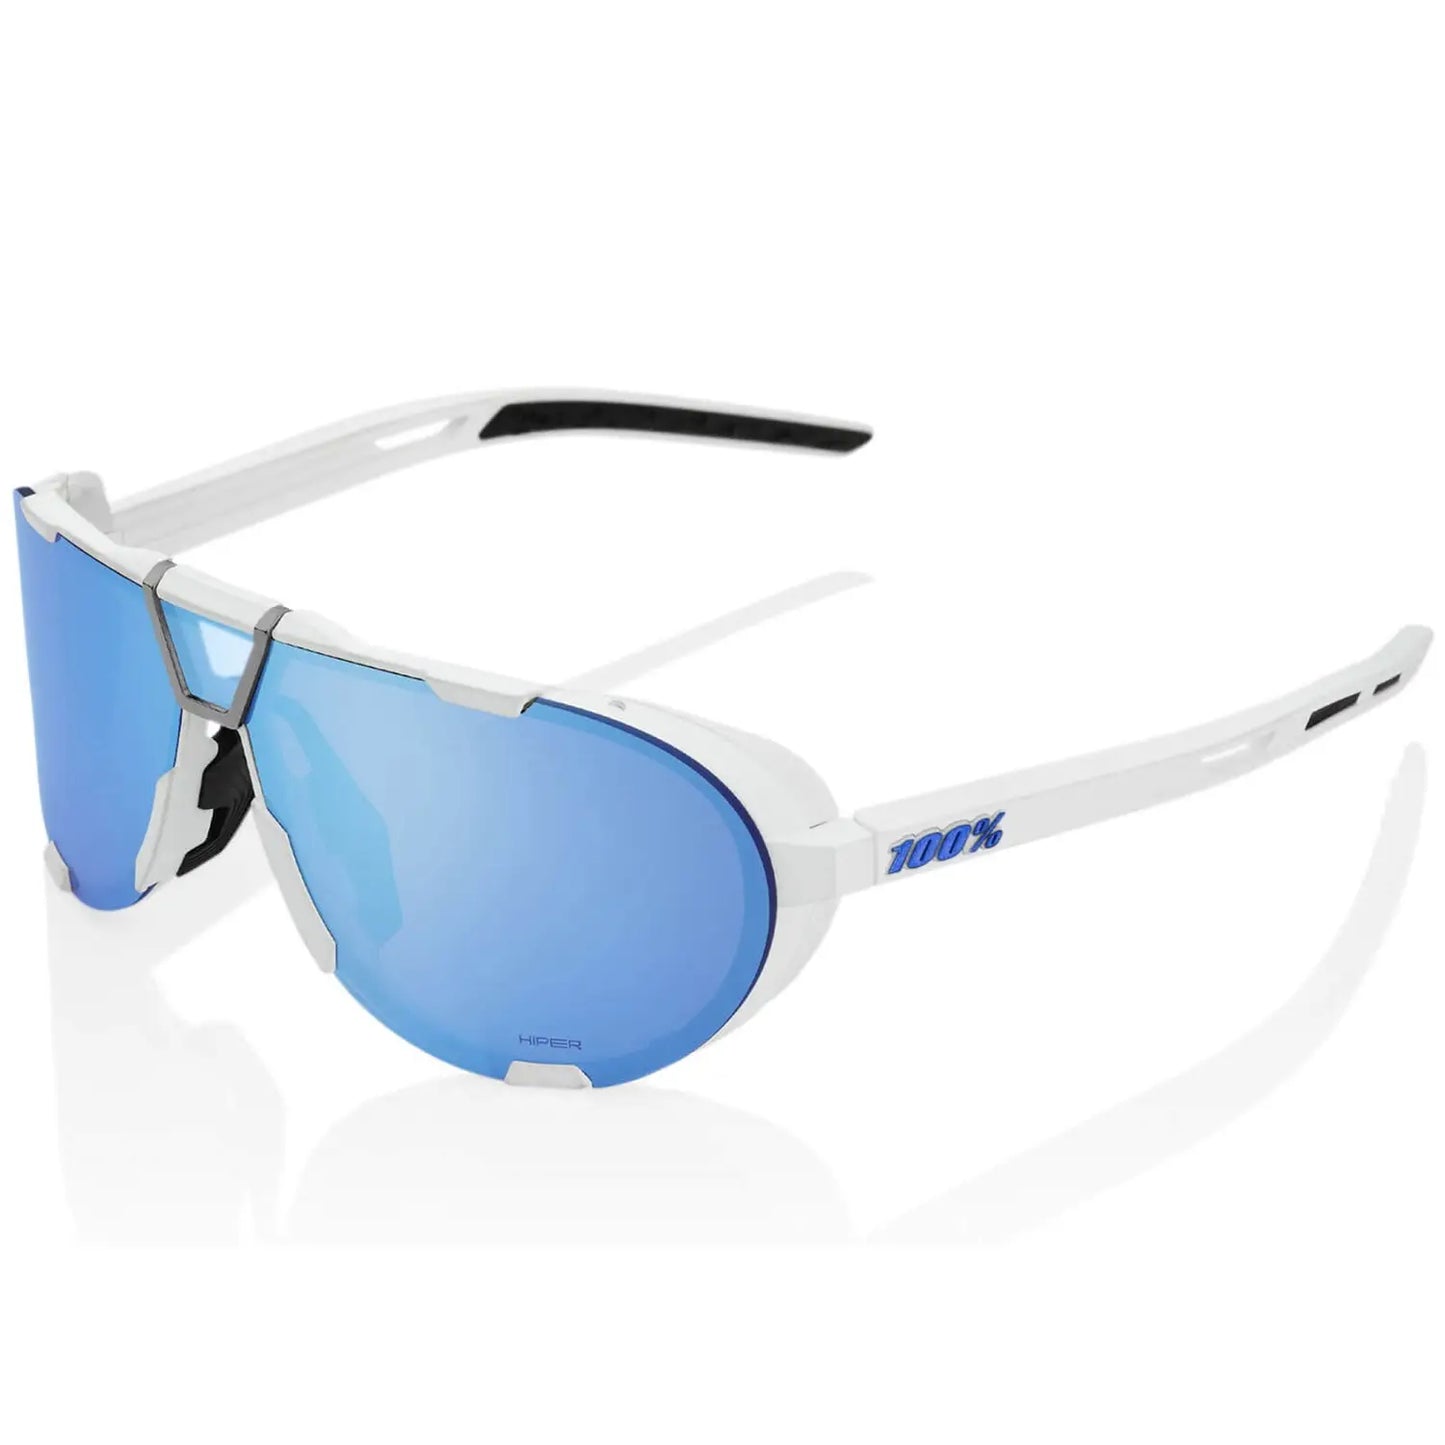 100% WESTCRAFT - Soft Tact White - Hiper Blue Multilayer Mirror lens